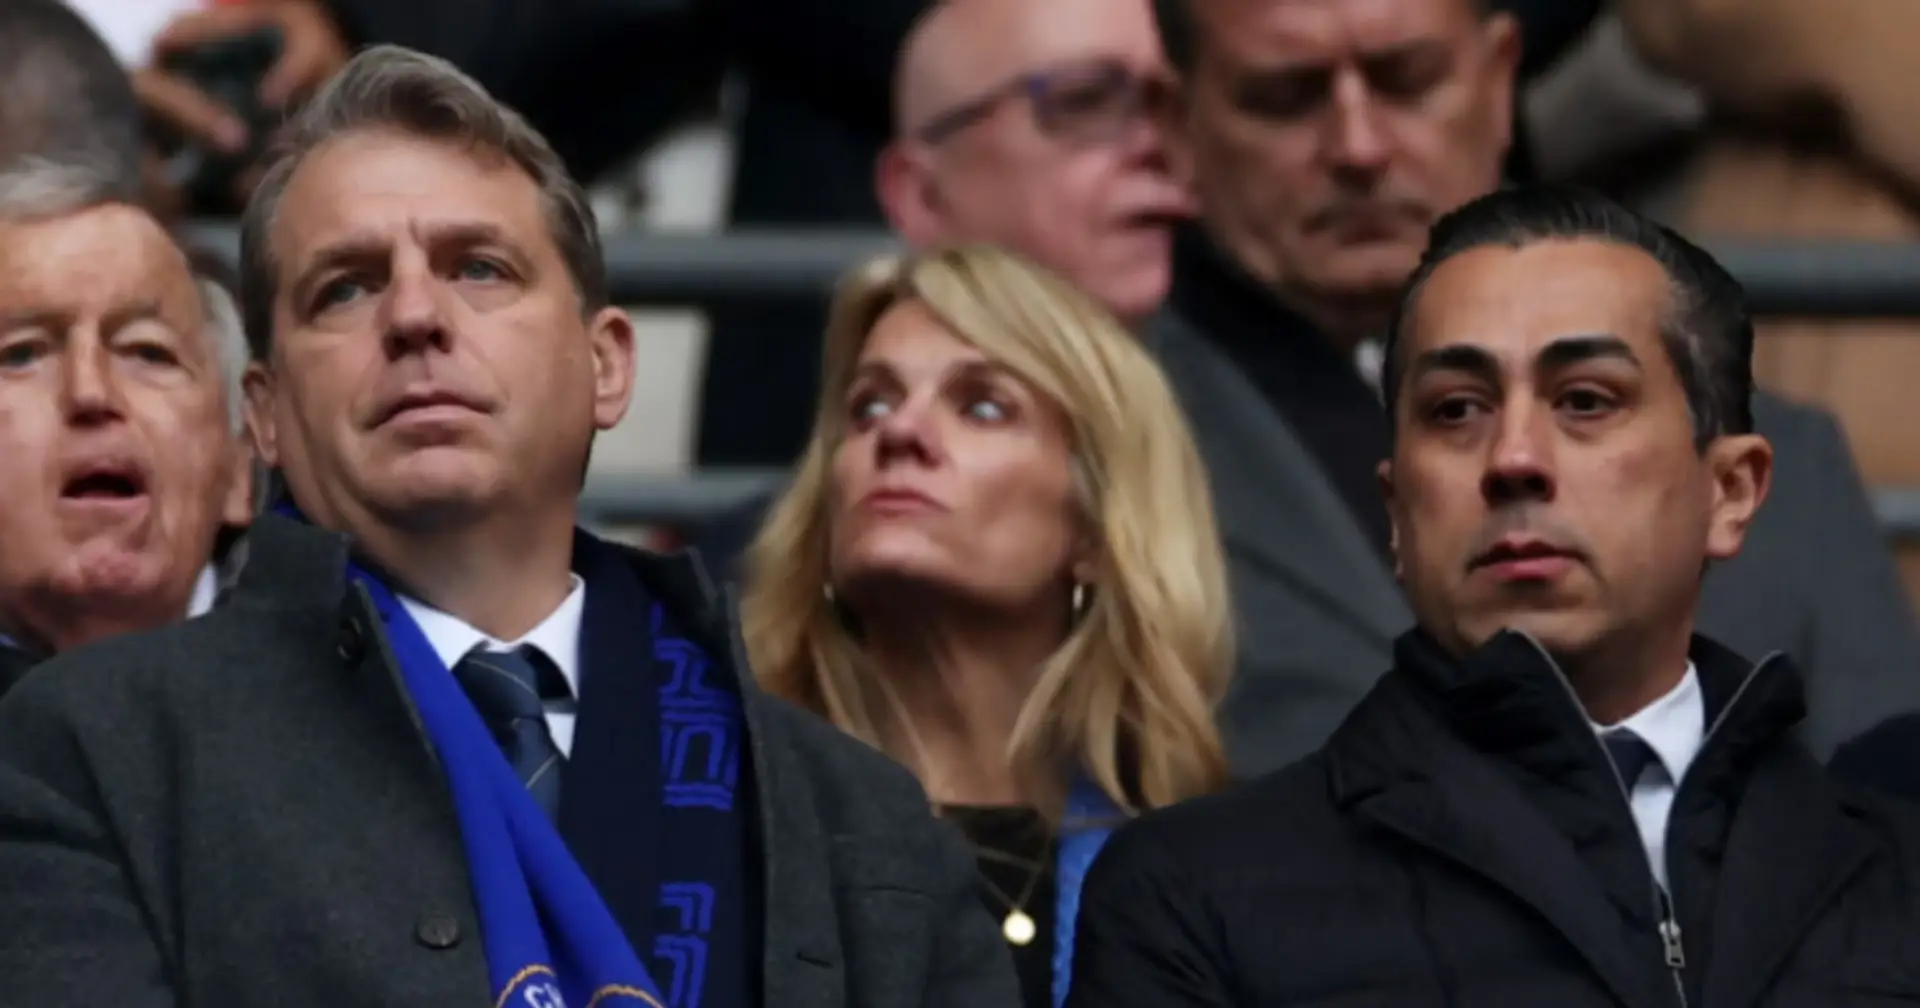 Will Chelsea need to sell players before June 30? Top source answers